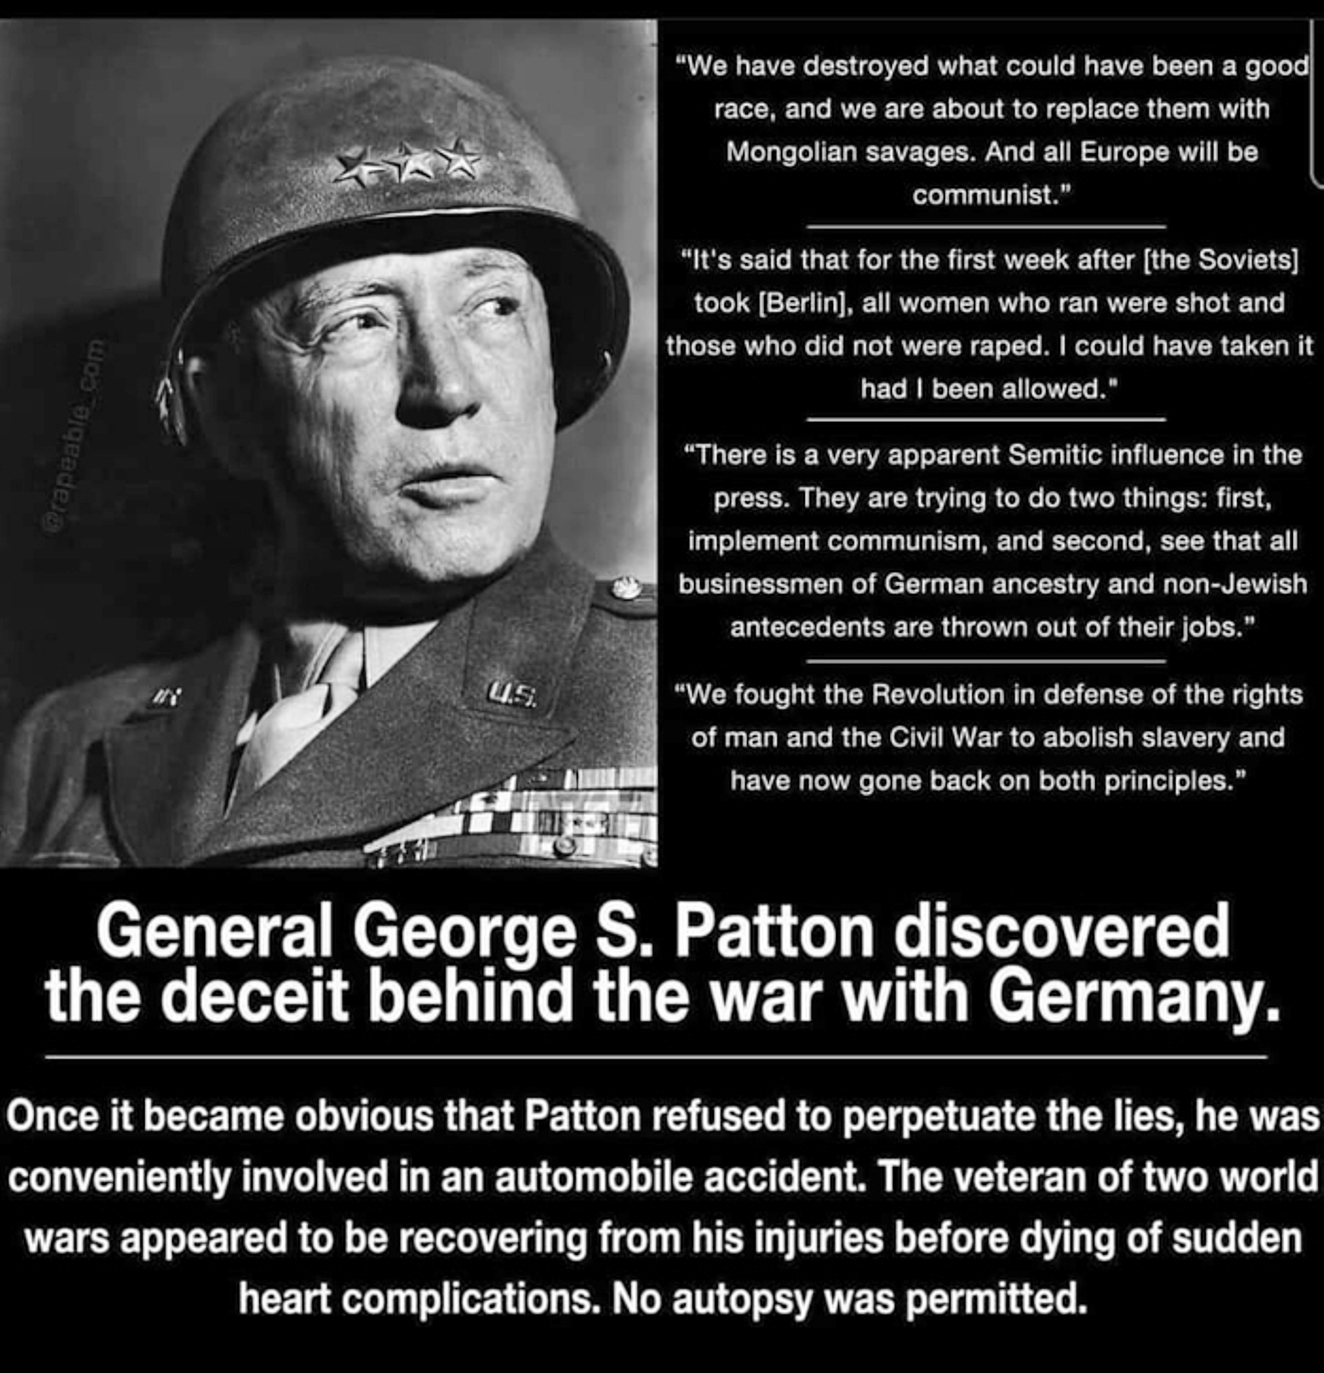 What General Patton Discovered